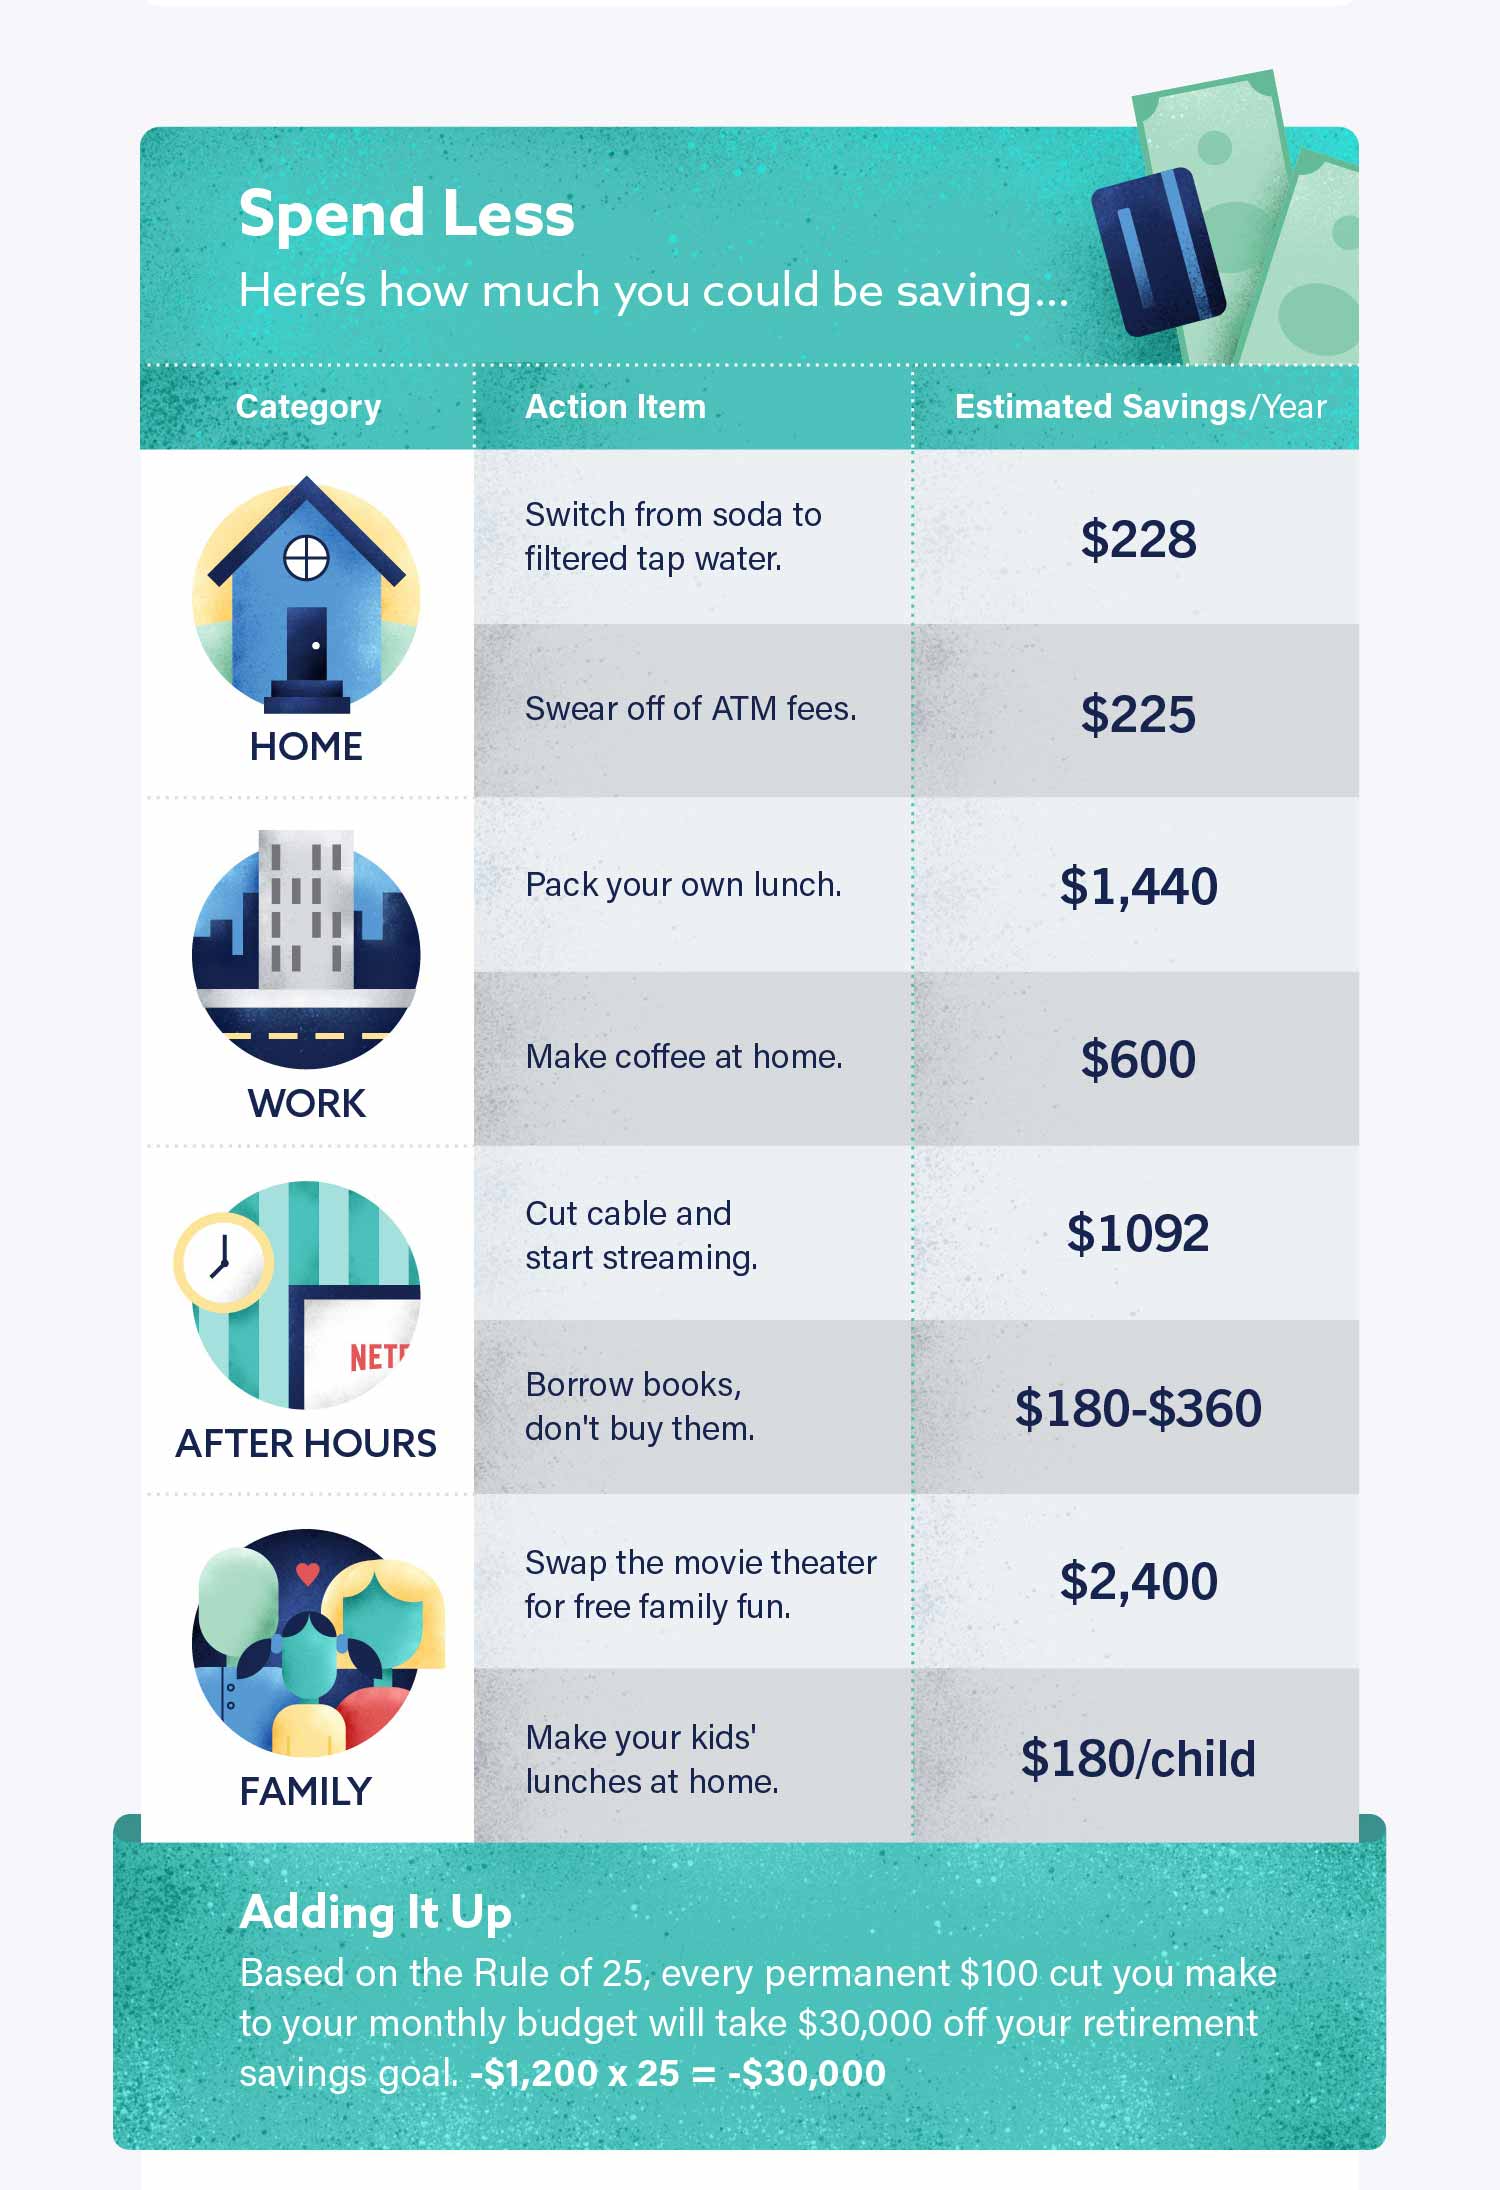 Infographic that illustrates how to start F.I.R.E (Financial Independence and Early Retirement)